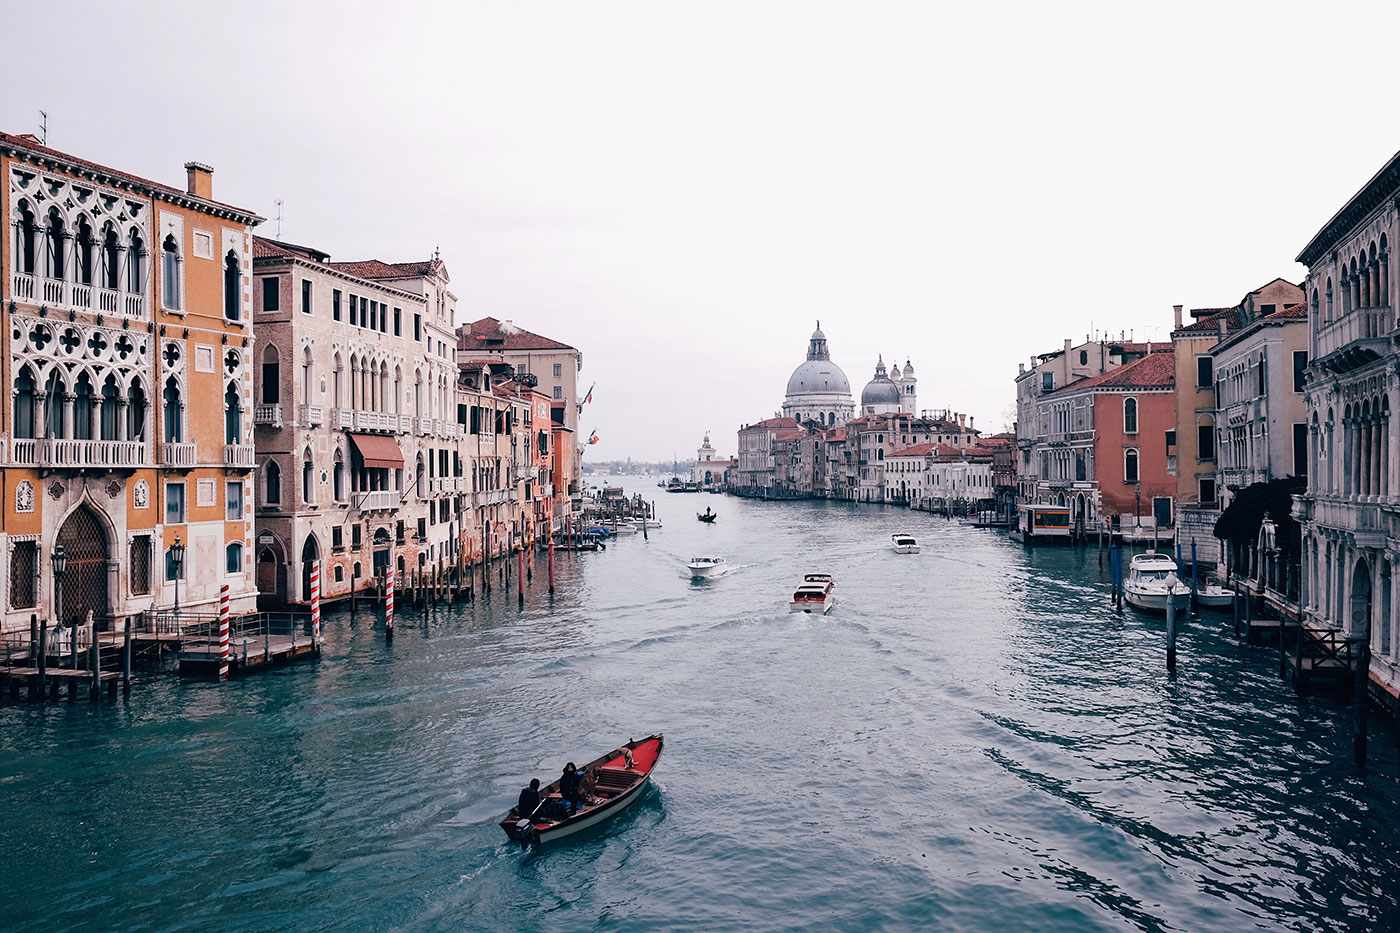 9 Timeless Wedding Venues in Venice, Italy